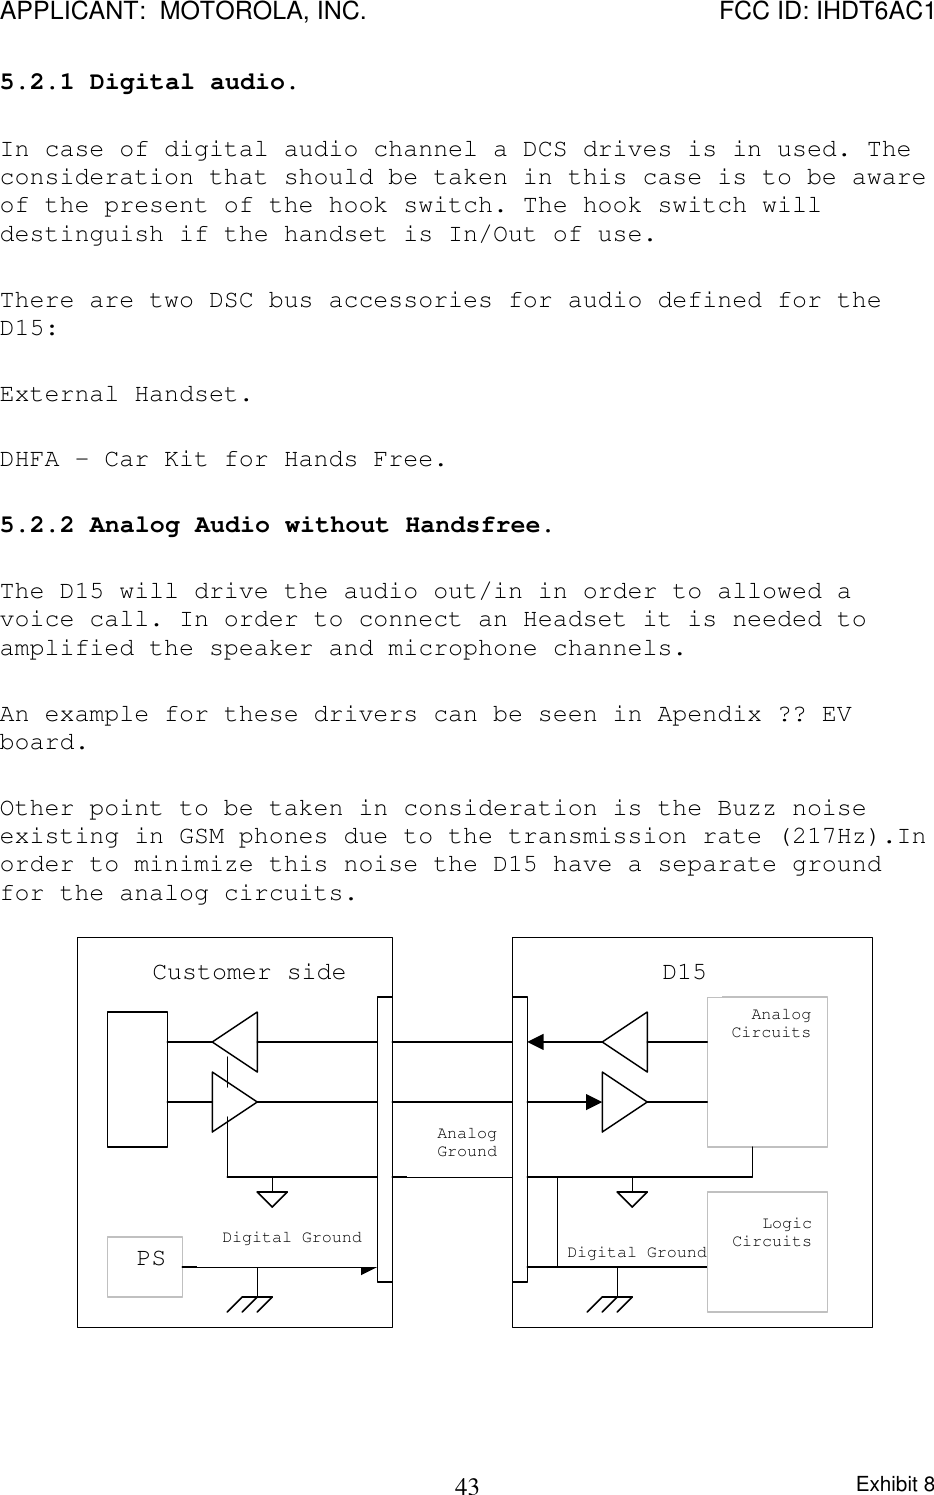 APPLICANT:  MOTOROLA, INC. FCC ID: IHDT6AC1Exhibit 8435.2.1 Digital audio.In case of digital audio channel a DCS drives is in used. Theconsideration that should be taken in this case is to be awareof the present of the hook switch. The hook switch willdestinguish if the handset is In/Out of use.There are two DSC bus accessories for audio defined for theD15:External Handset.DHFA - Car Kit for Hands Free.5.2.2 Analog Audio without Handsfree.The D15 will drive the audio out/in in order to allowed avoice call. In order to connect an Headset it is needed toamplified the speaker and microphone channels.An example for these drivers can be seen in Apendix ?? EVboard.Other point to be taken in consideration is the Buzz noiseexisting in GSM phones due to the transmission rate (217Hz).Inorder to minimize this noise the D15 have a separate groundfor the analog circuits.AnalogCircuitsLogicCircuitsPSDigital GroundDigital GroundAnalogGroundCustomer sideD15